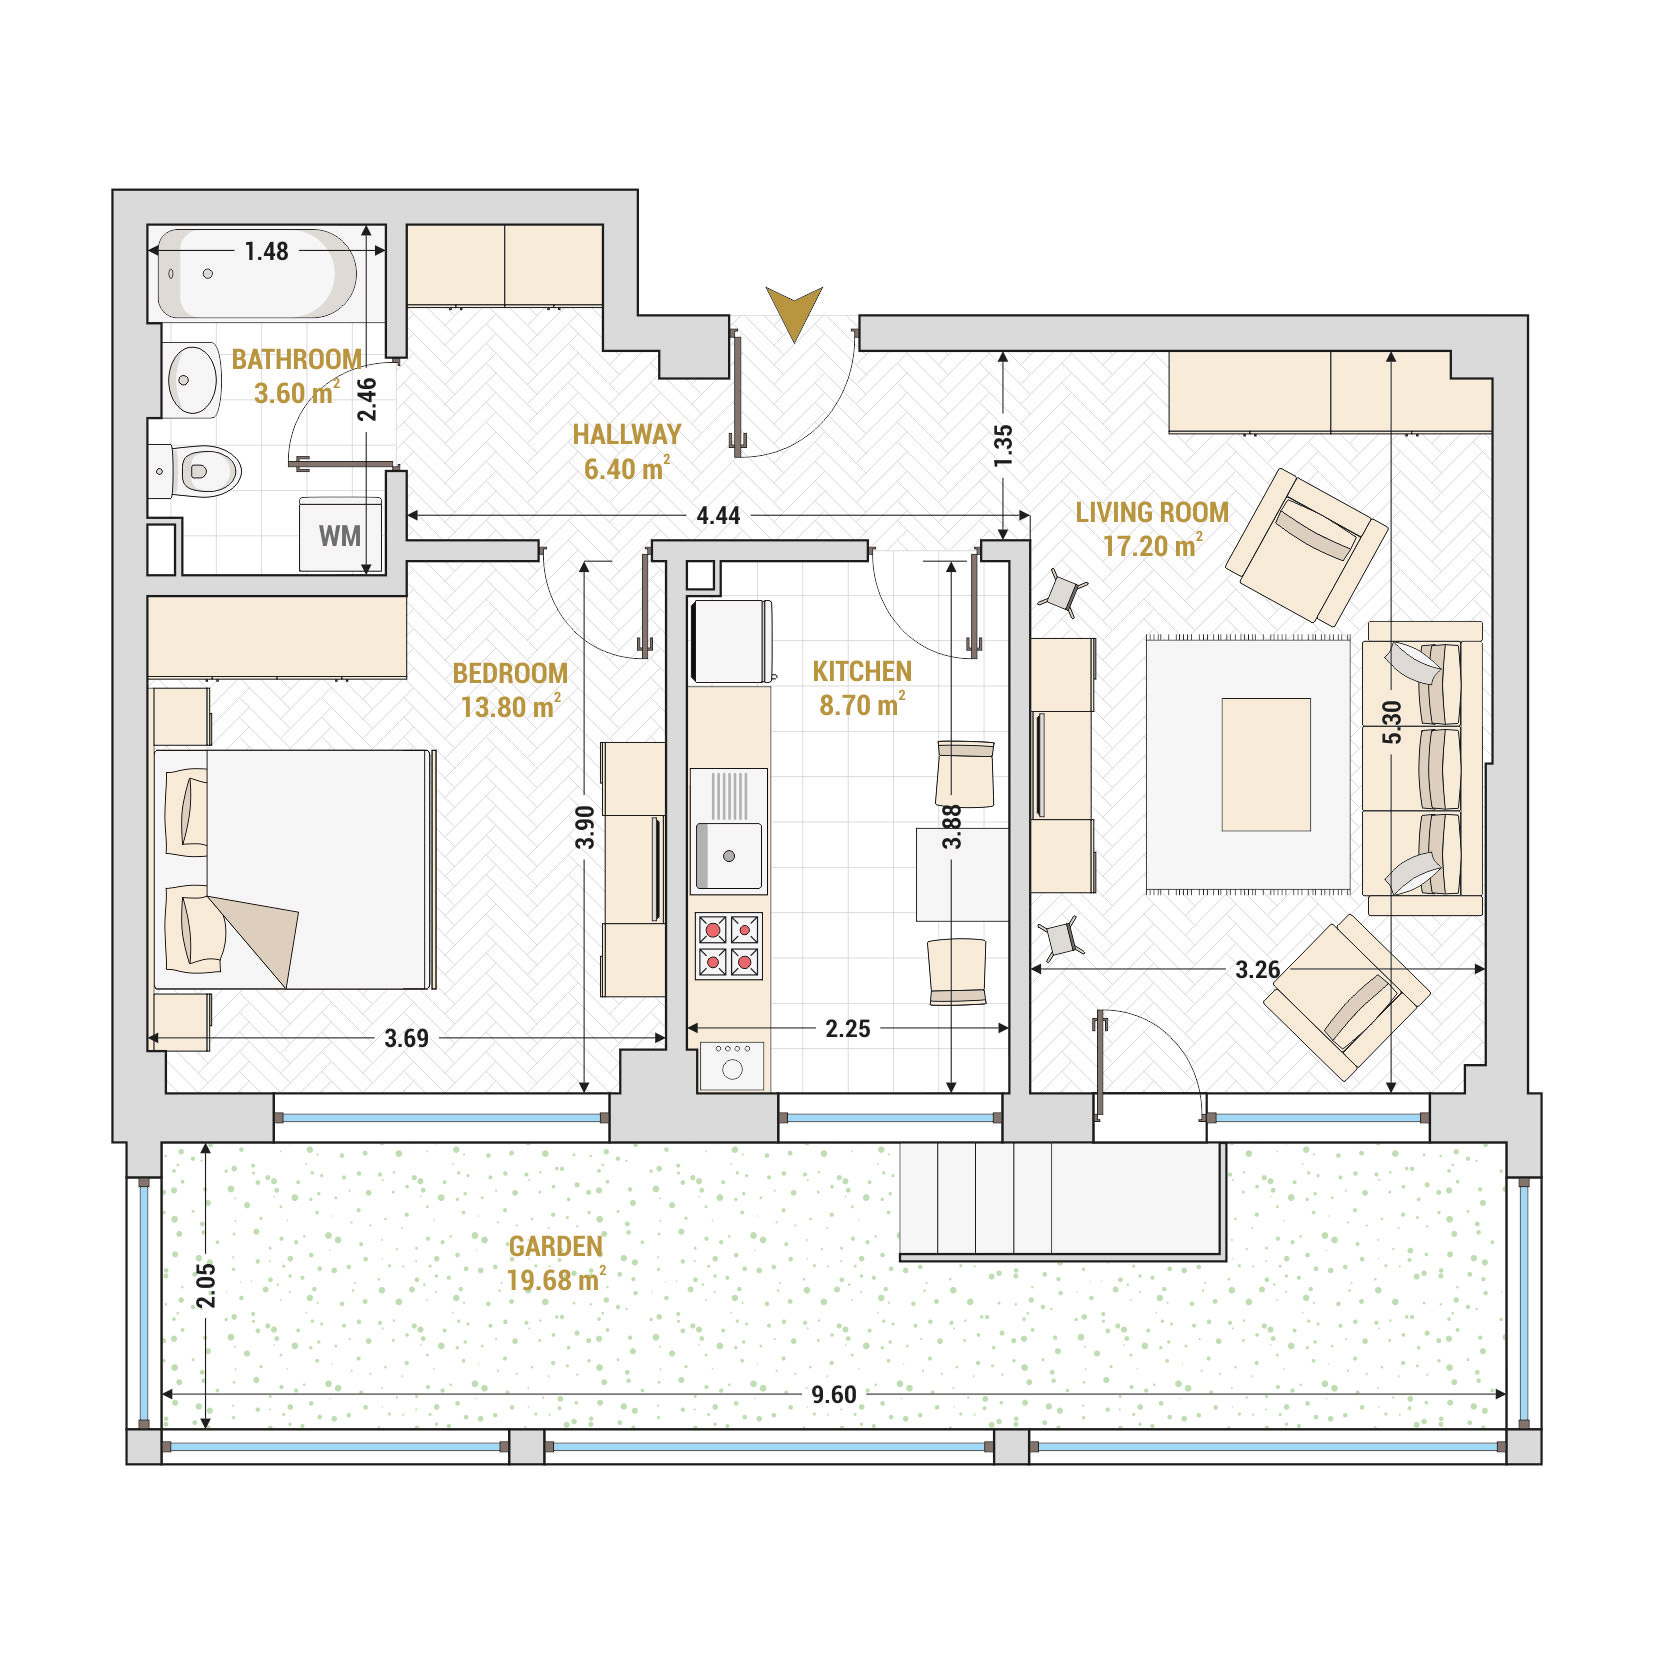 Catedral Residence - 2 Room Apartments for Sale - Bucharest - Romania - 2 Room Apartment Type 5 – Total Useful Area 69.38 square meters